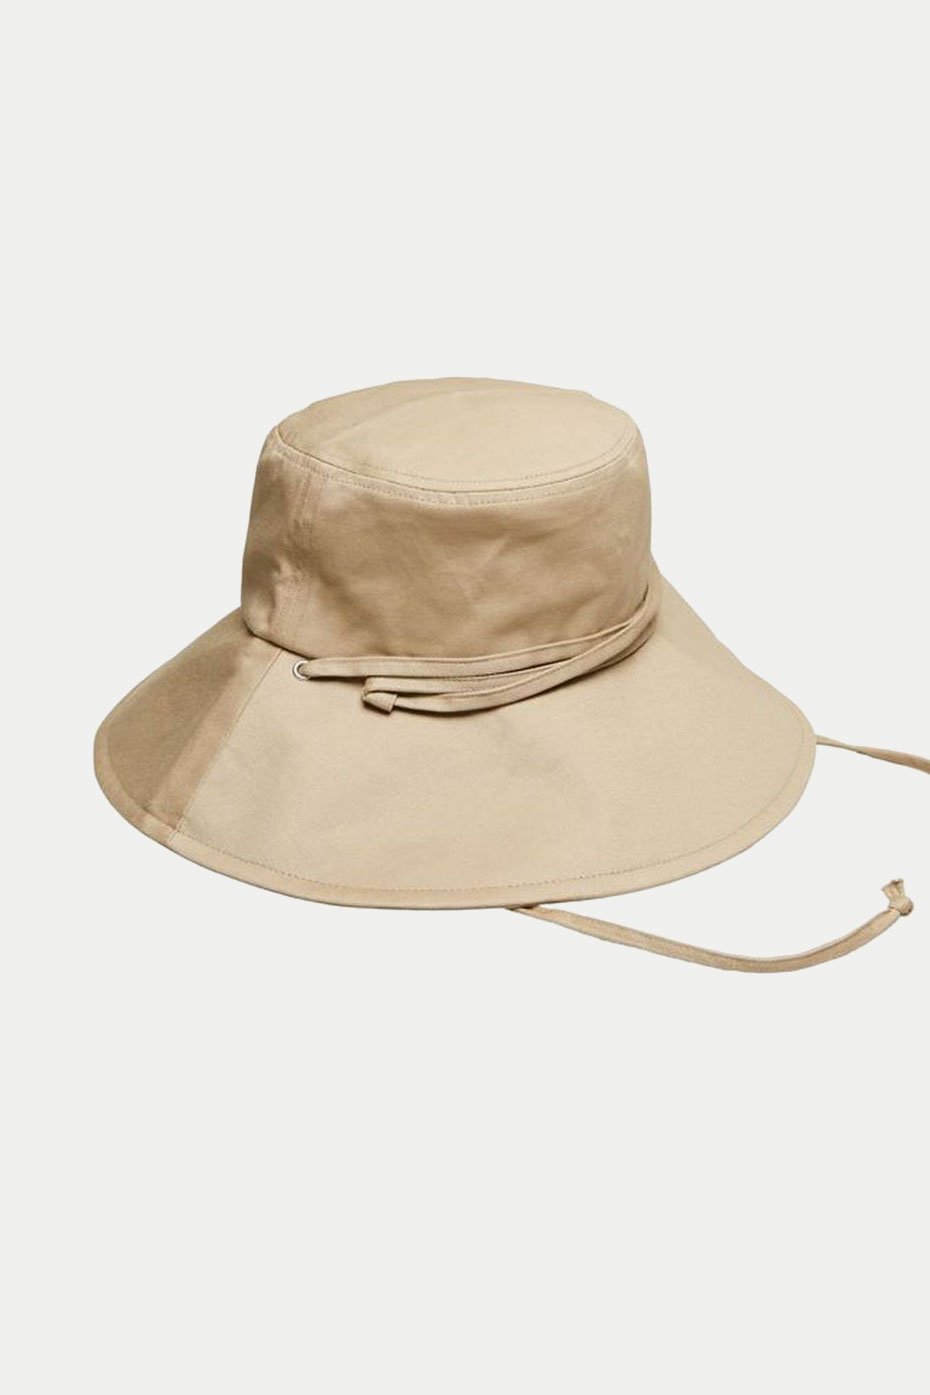 Selected Femme Nomad Polly Bucket Hat